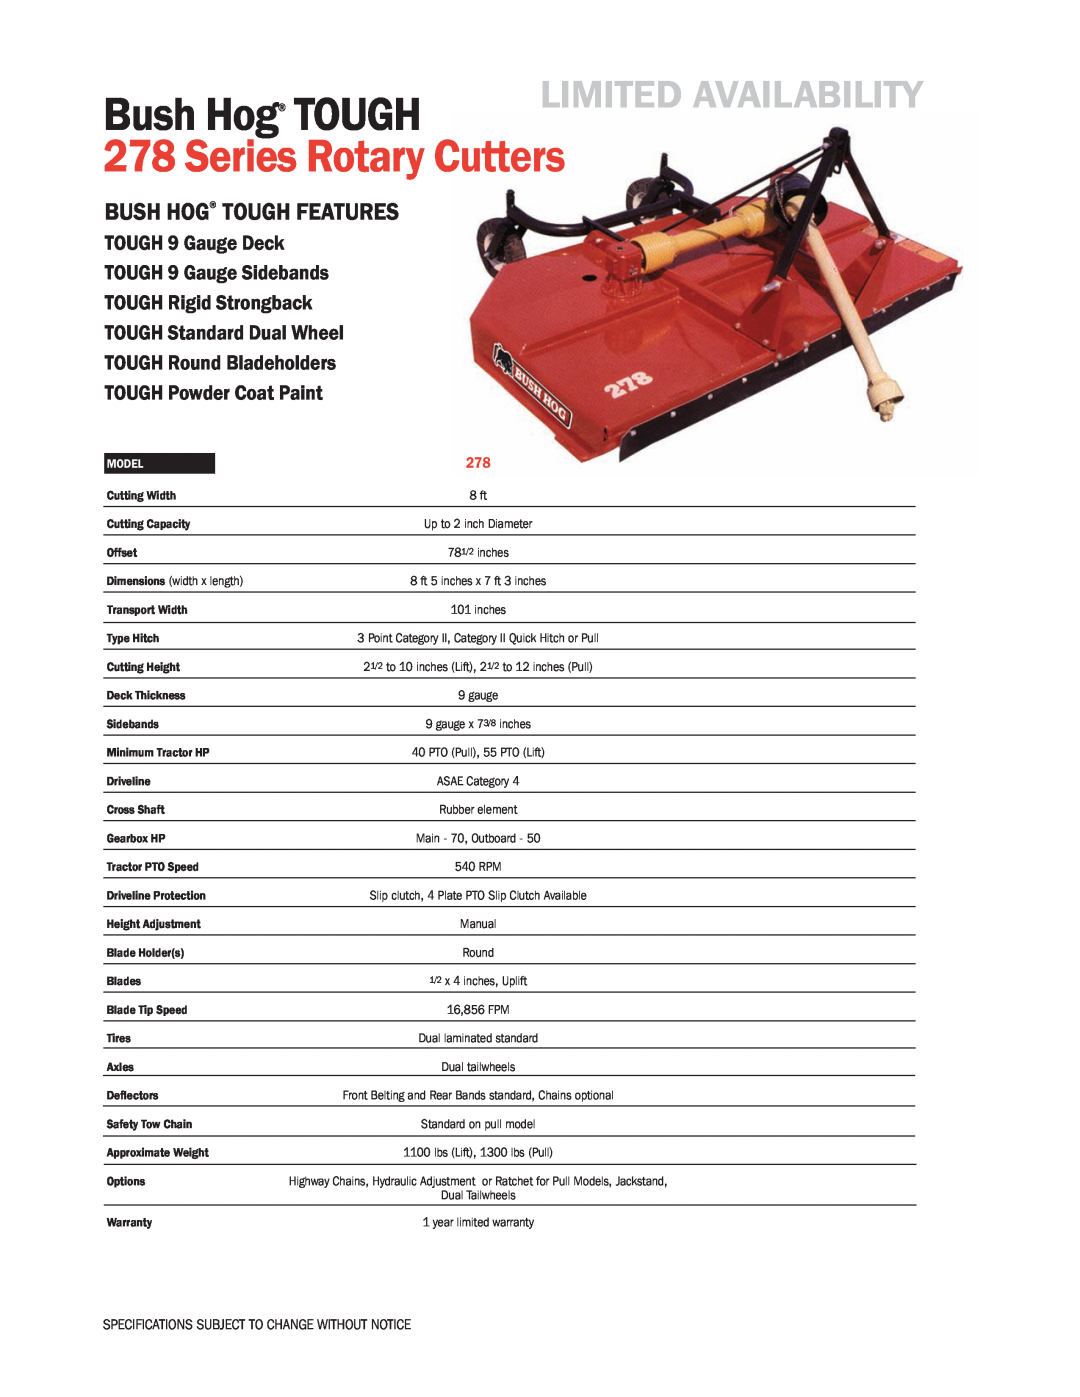 Bush Hog 278 specifications Series Rotary Cutters, Limited Availability, Bush Hog TOUGH Features, Model 